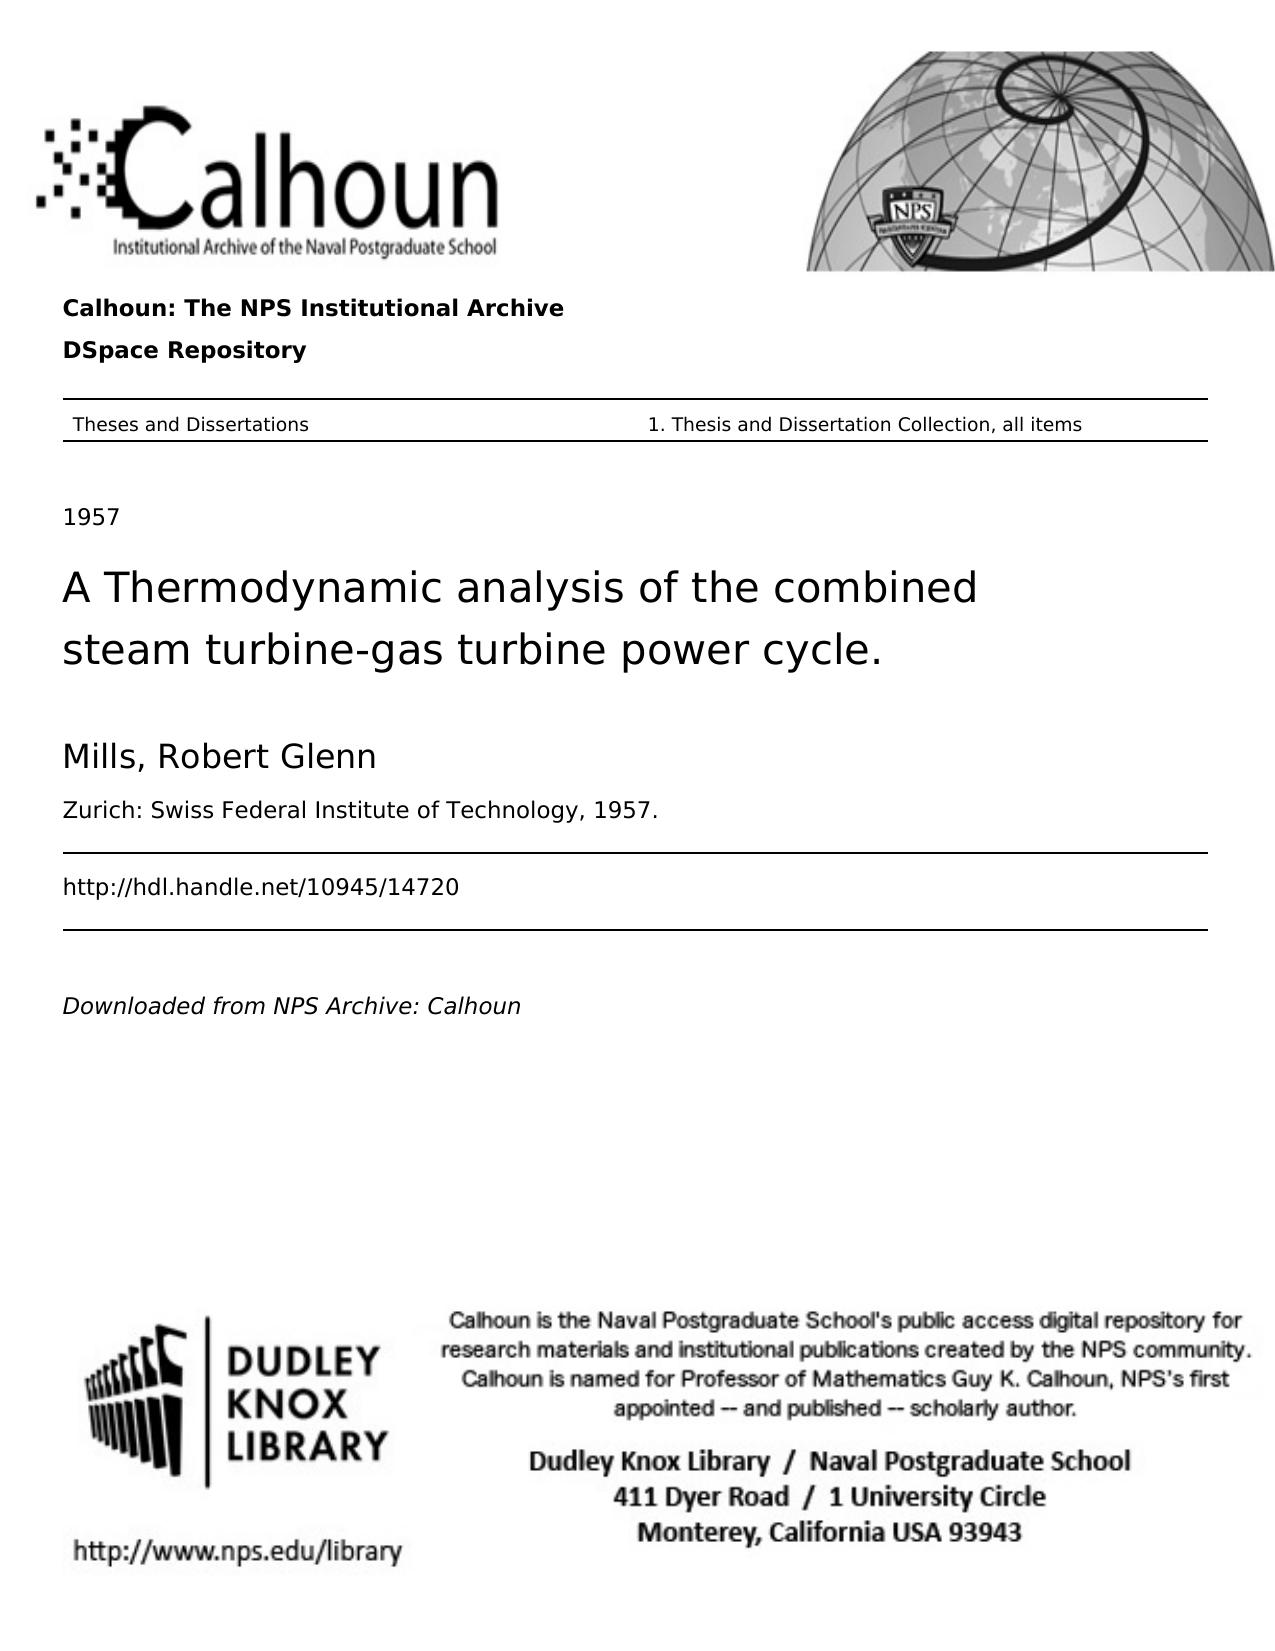 A Thermodynamic analysis of the combined steam turbine-gas turbine power cycle.